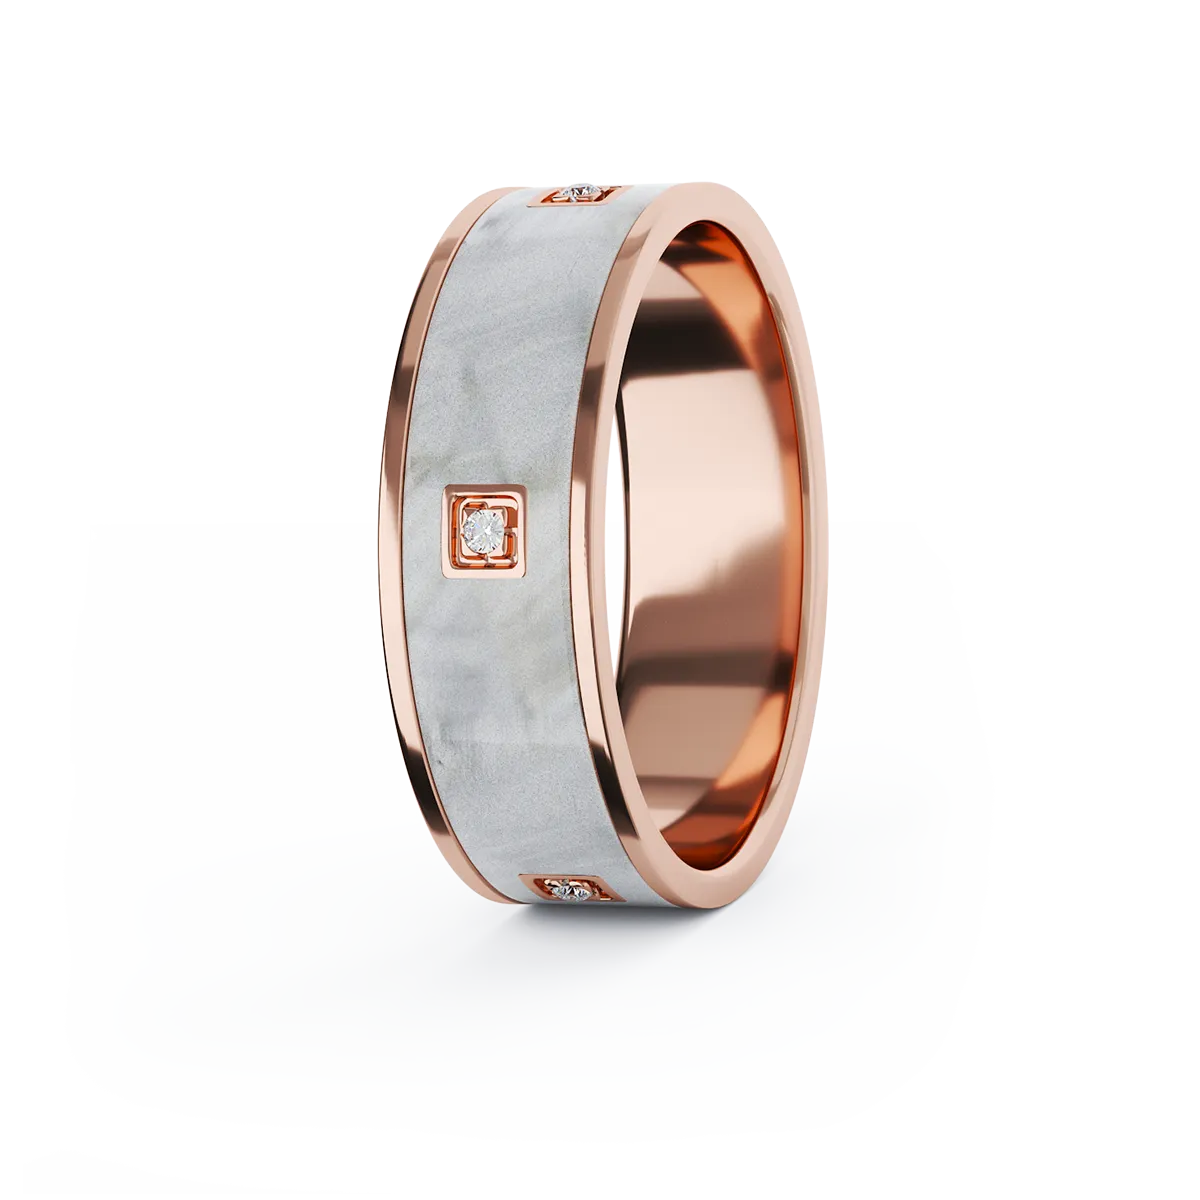 FLAIR gold and ceramic wedding ring